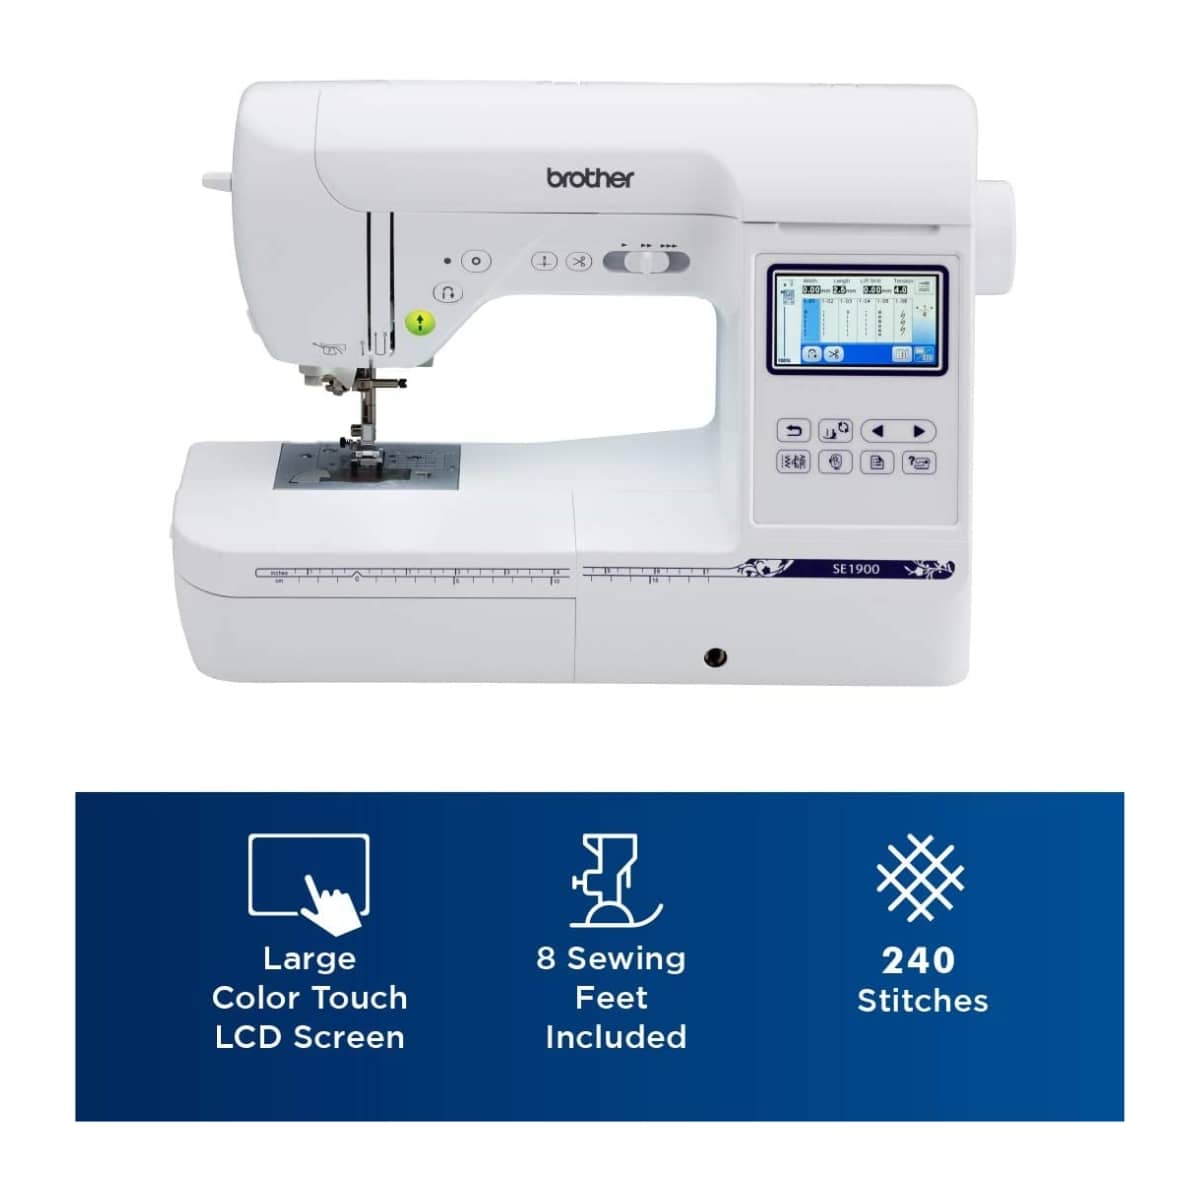 Unboxing Brother SE1900 Sewing & Embroidery Machine 